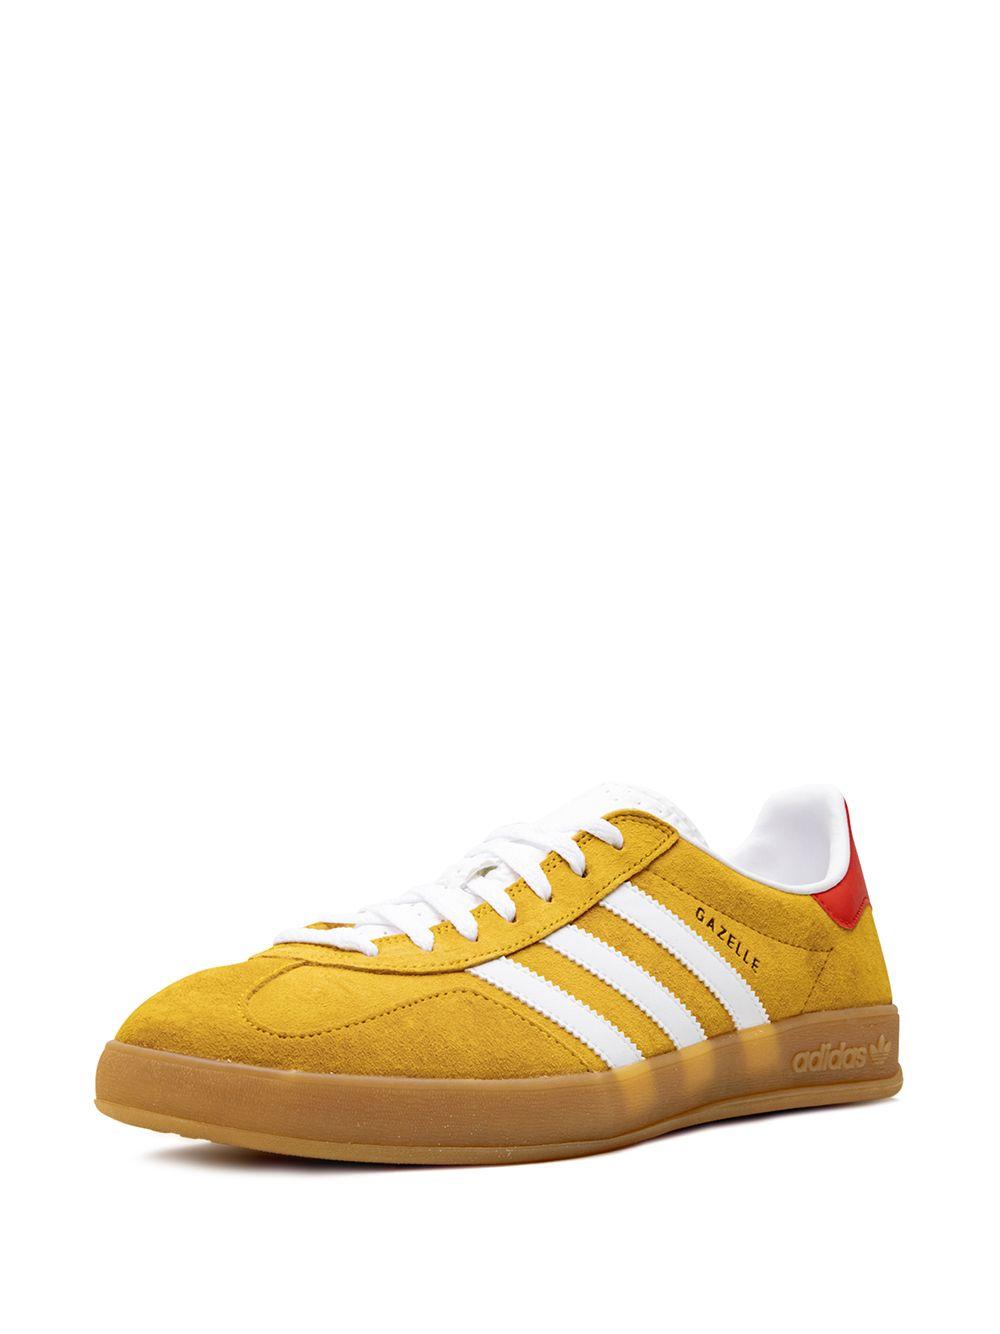 adidas Leather Gazelle Indoor Sneakers in Yellow for Men - Lyst